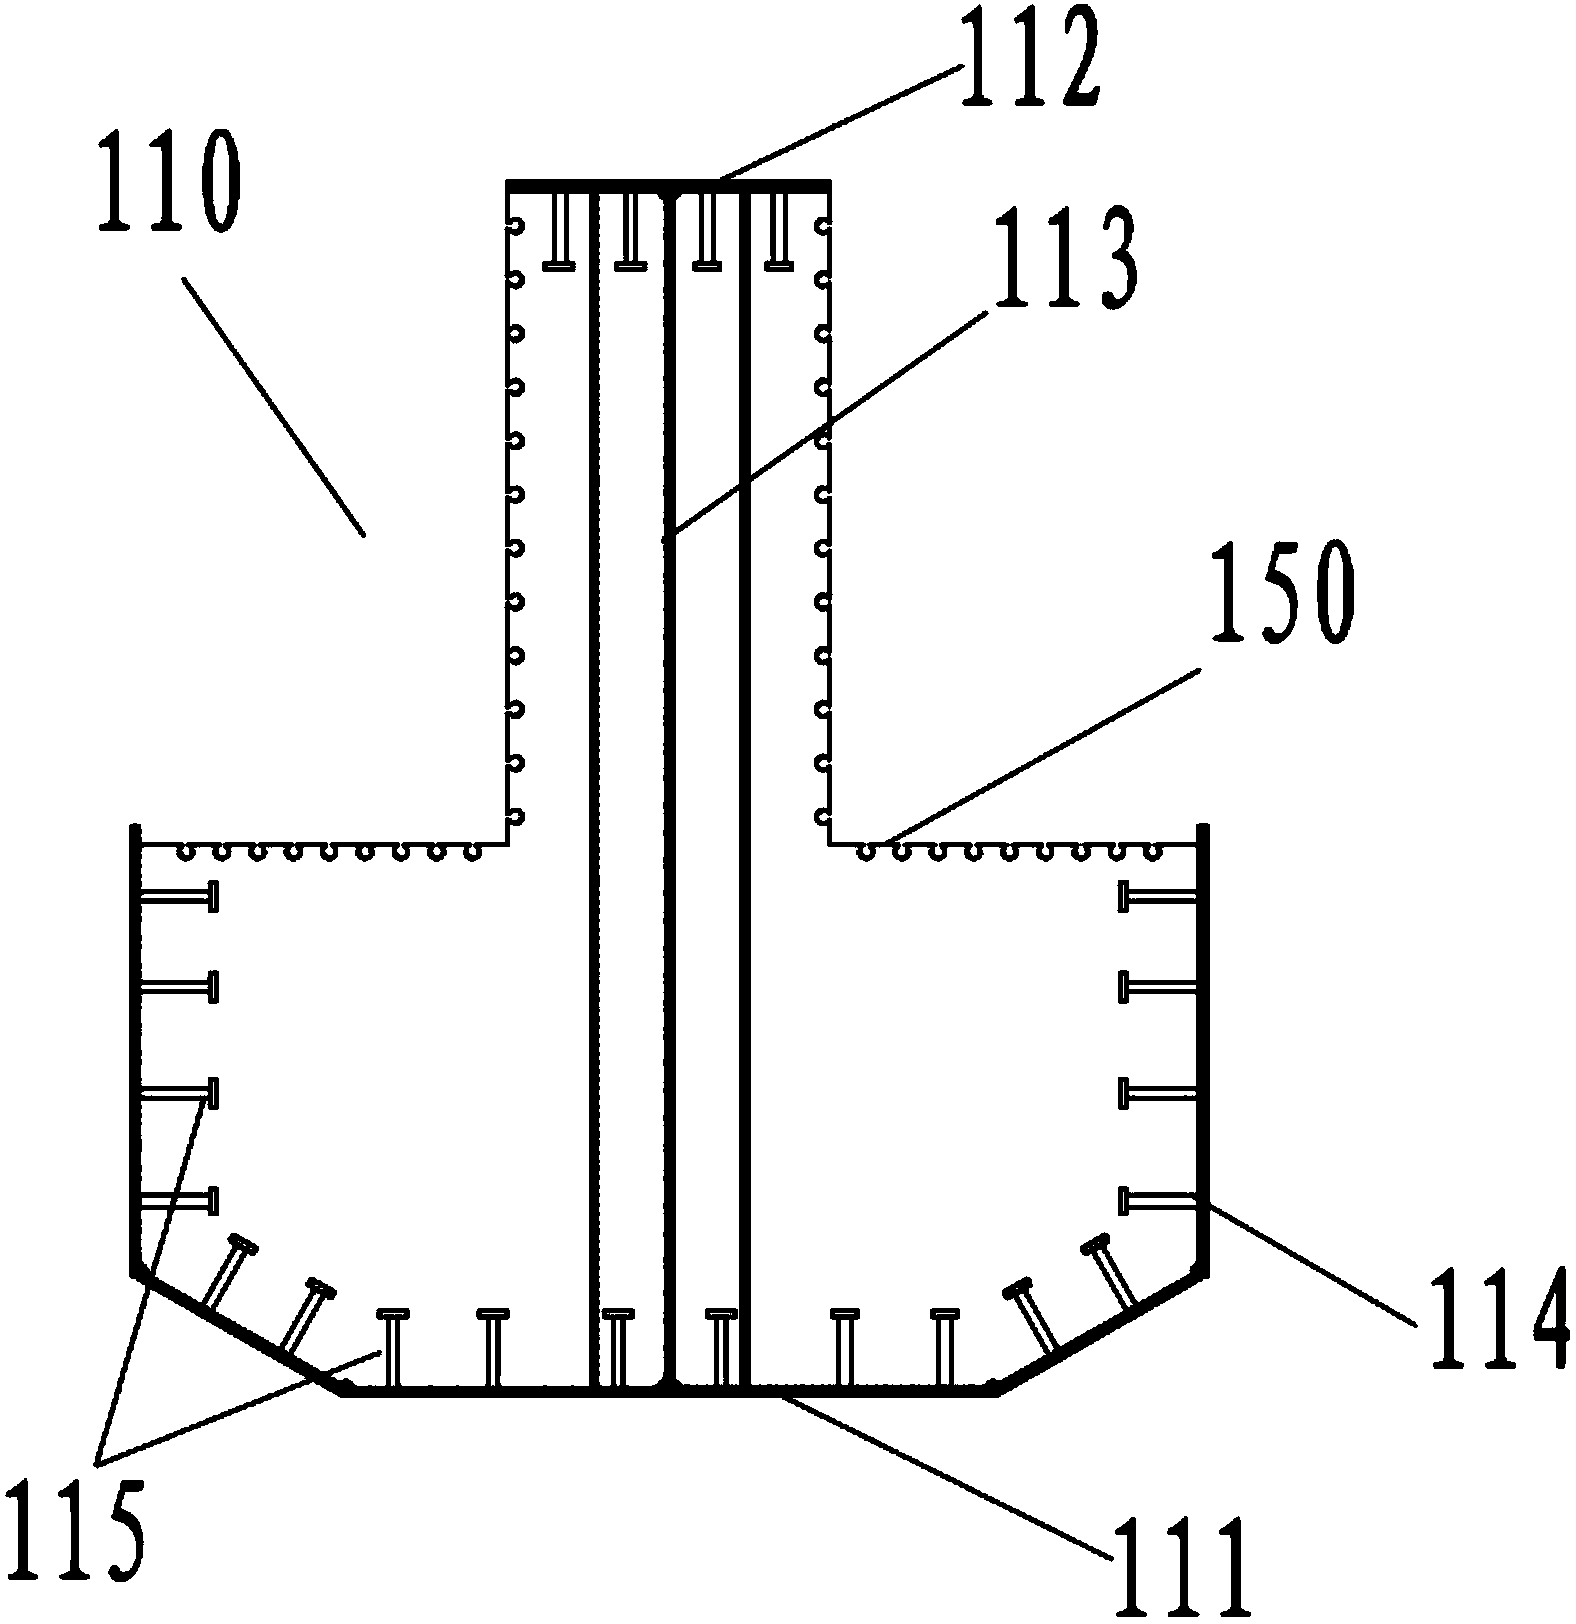 Cast-in-situ inverted-T-shaped bent cap and pier and pier construction process